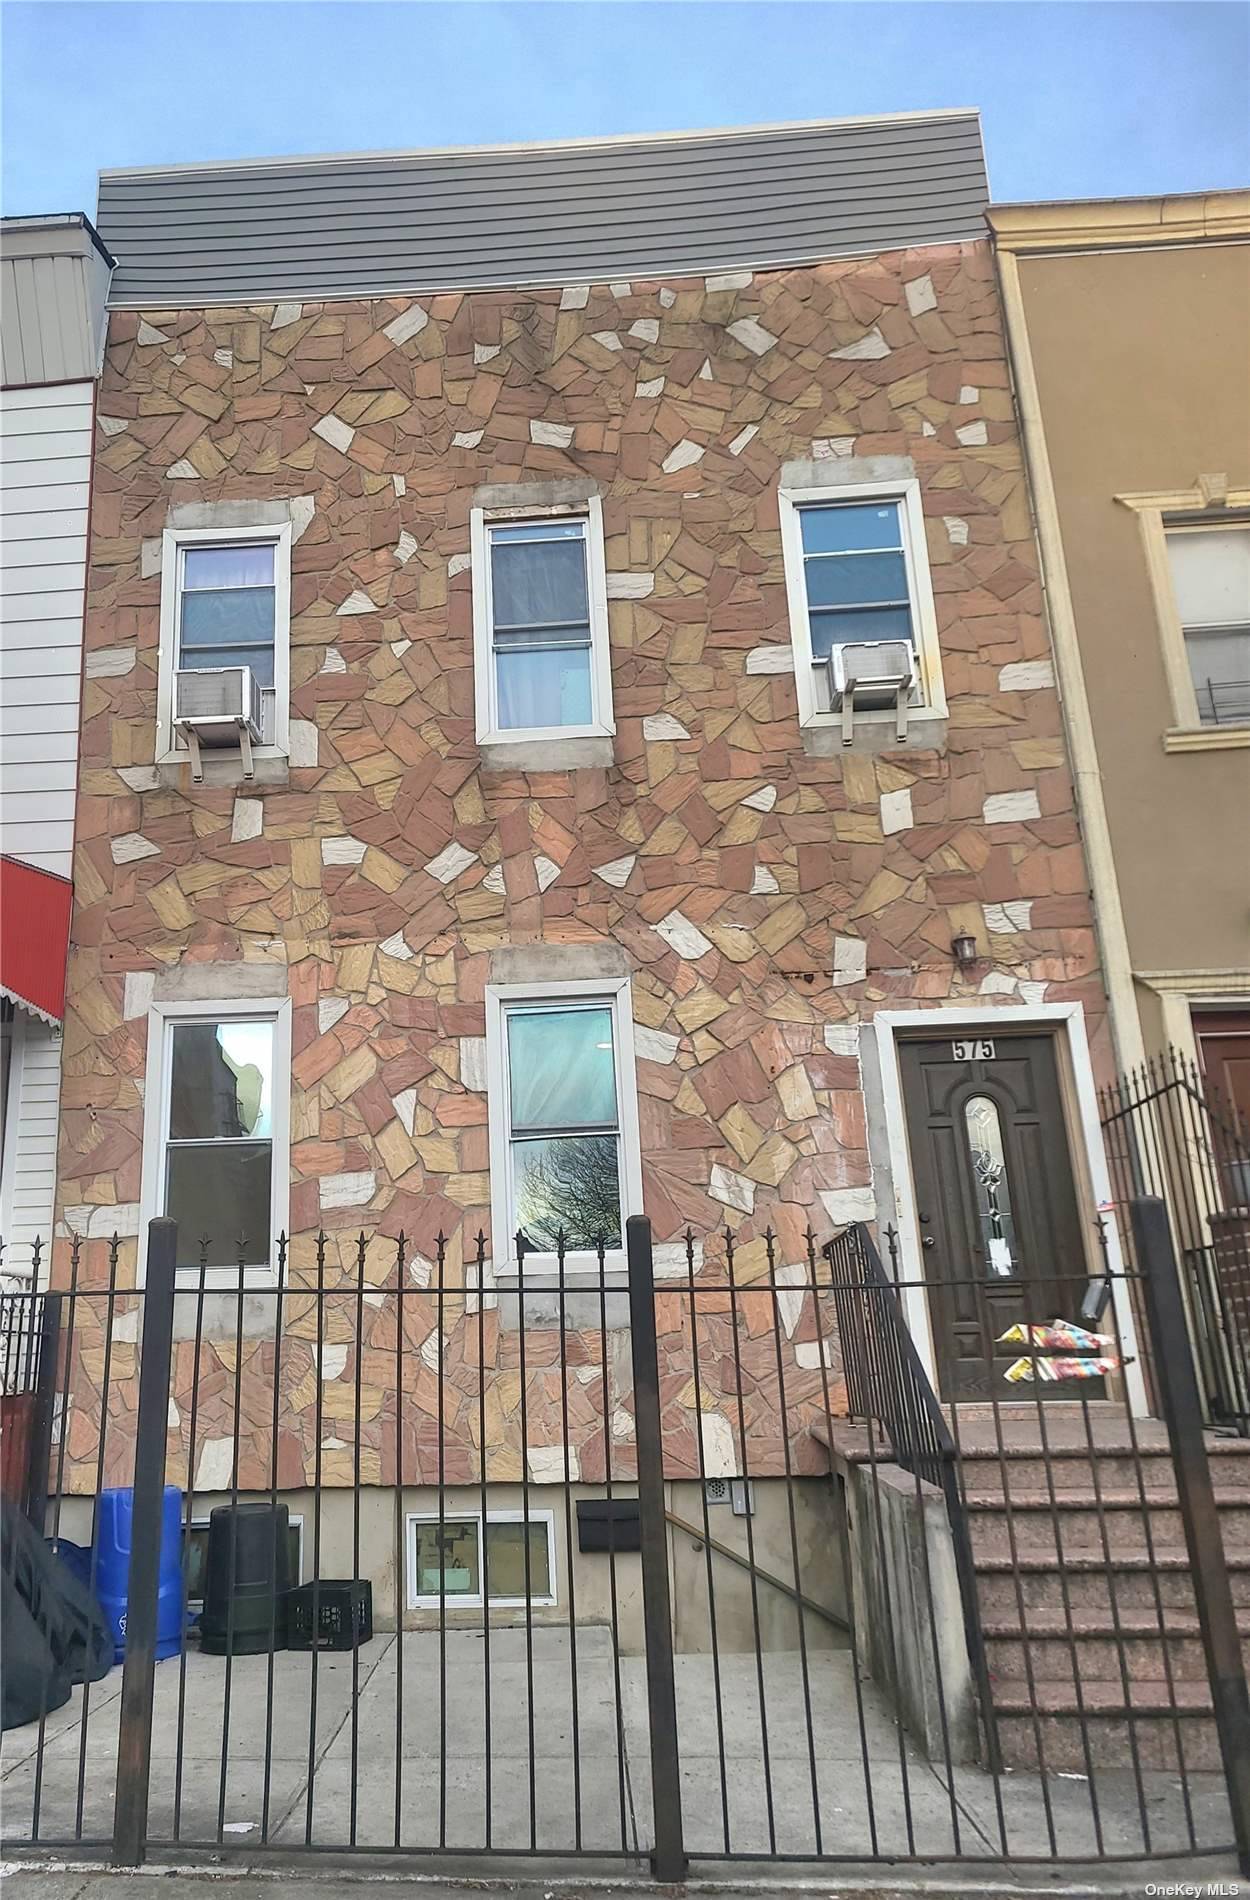 It's currently vacant. Beautifully renovated 2 family attached house in Bushwick in excellent condition.